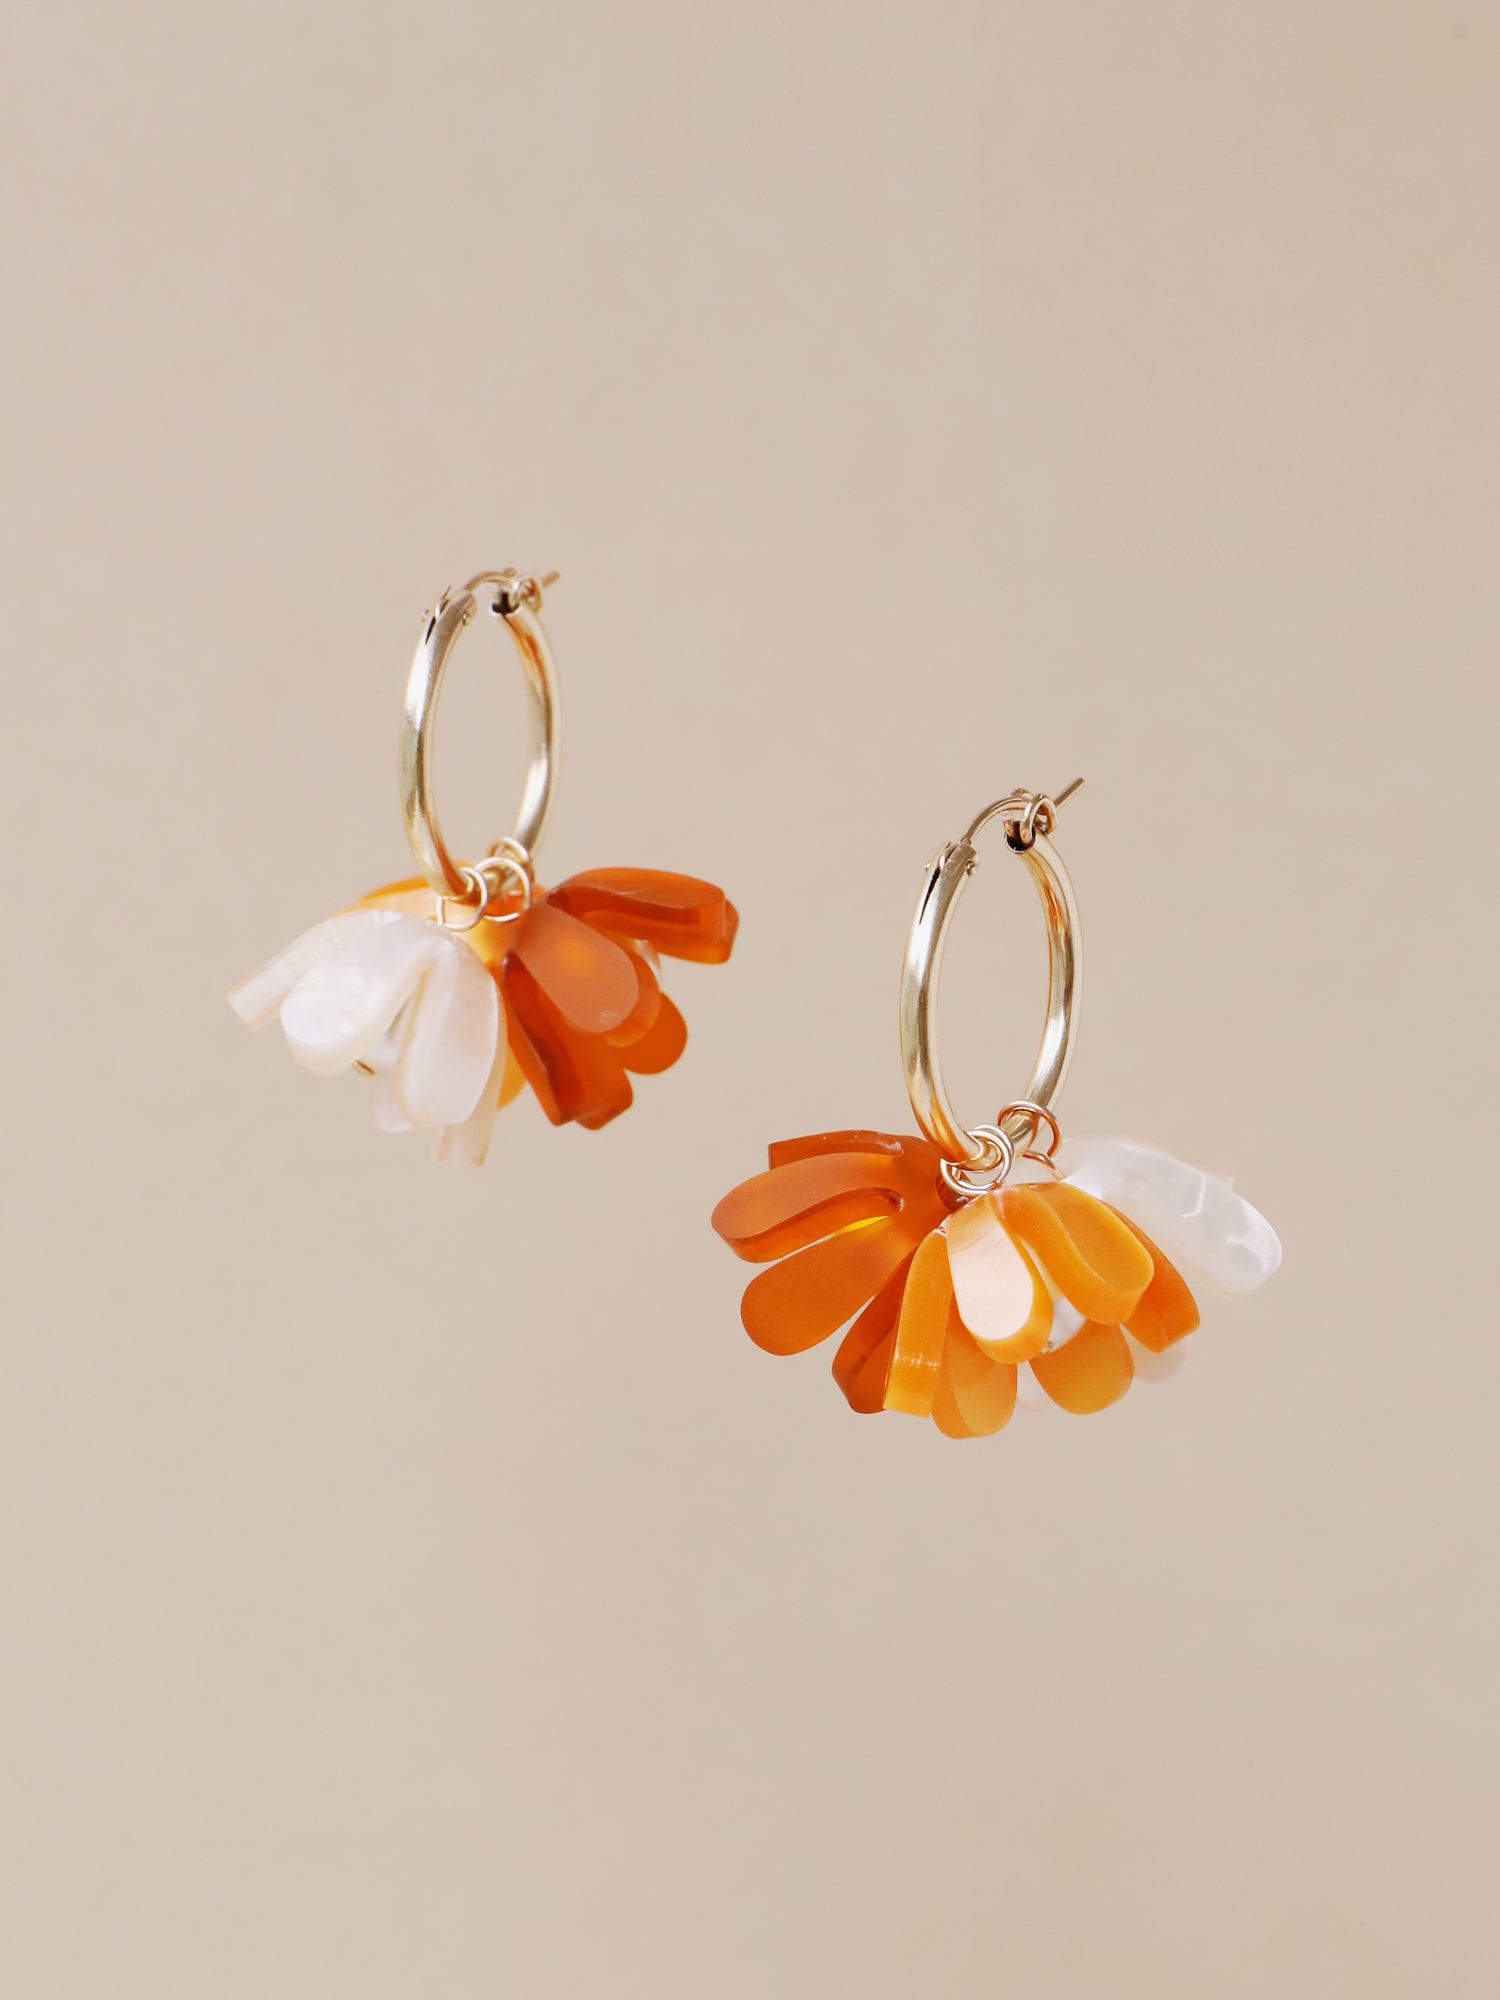 Statement tulip meadow hoop earrings with 8 interchangeable flowers in cream, orange & yellow shades. Made from heat-formed acrylic with high quality glass pearls and 14k gold-filled findings. Handmade in the UK by Wolf & Moon.